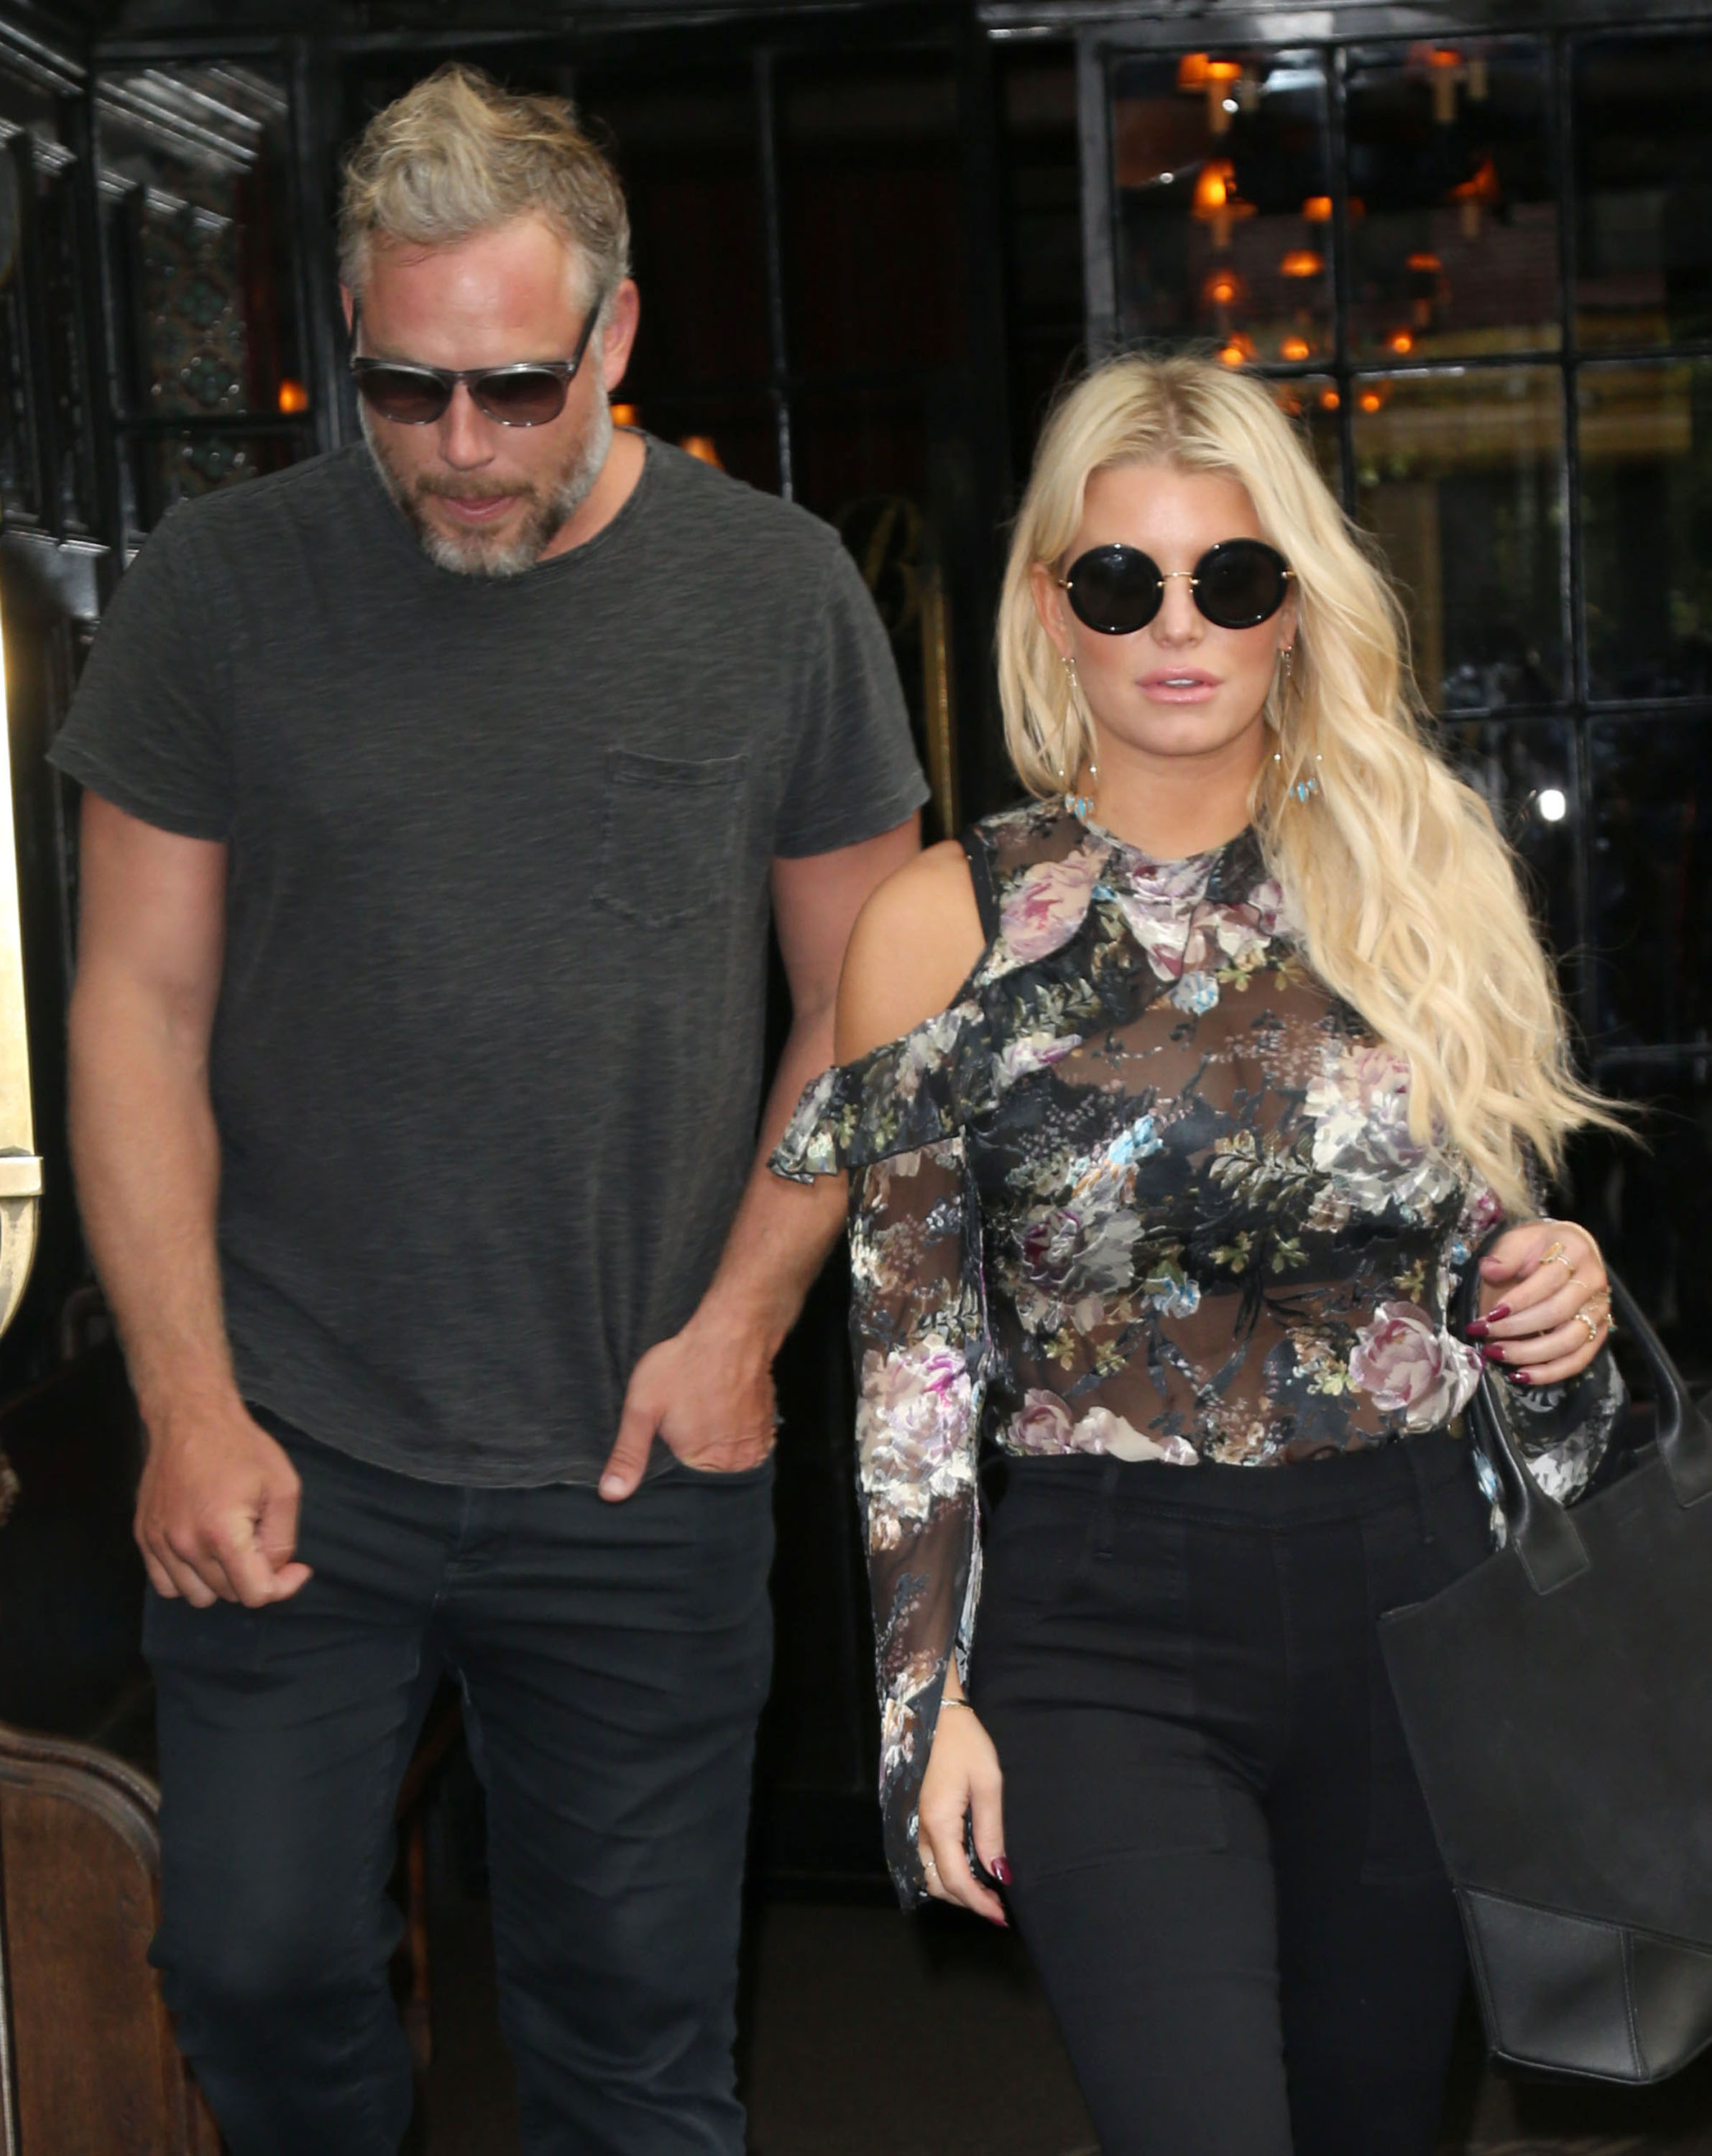 Jessica Simpson Pregnant: Third Baby To Keep Husband Eric Johnson From Filing For Divorce?